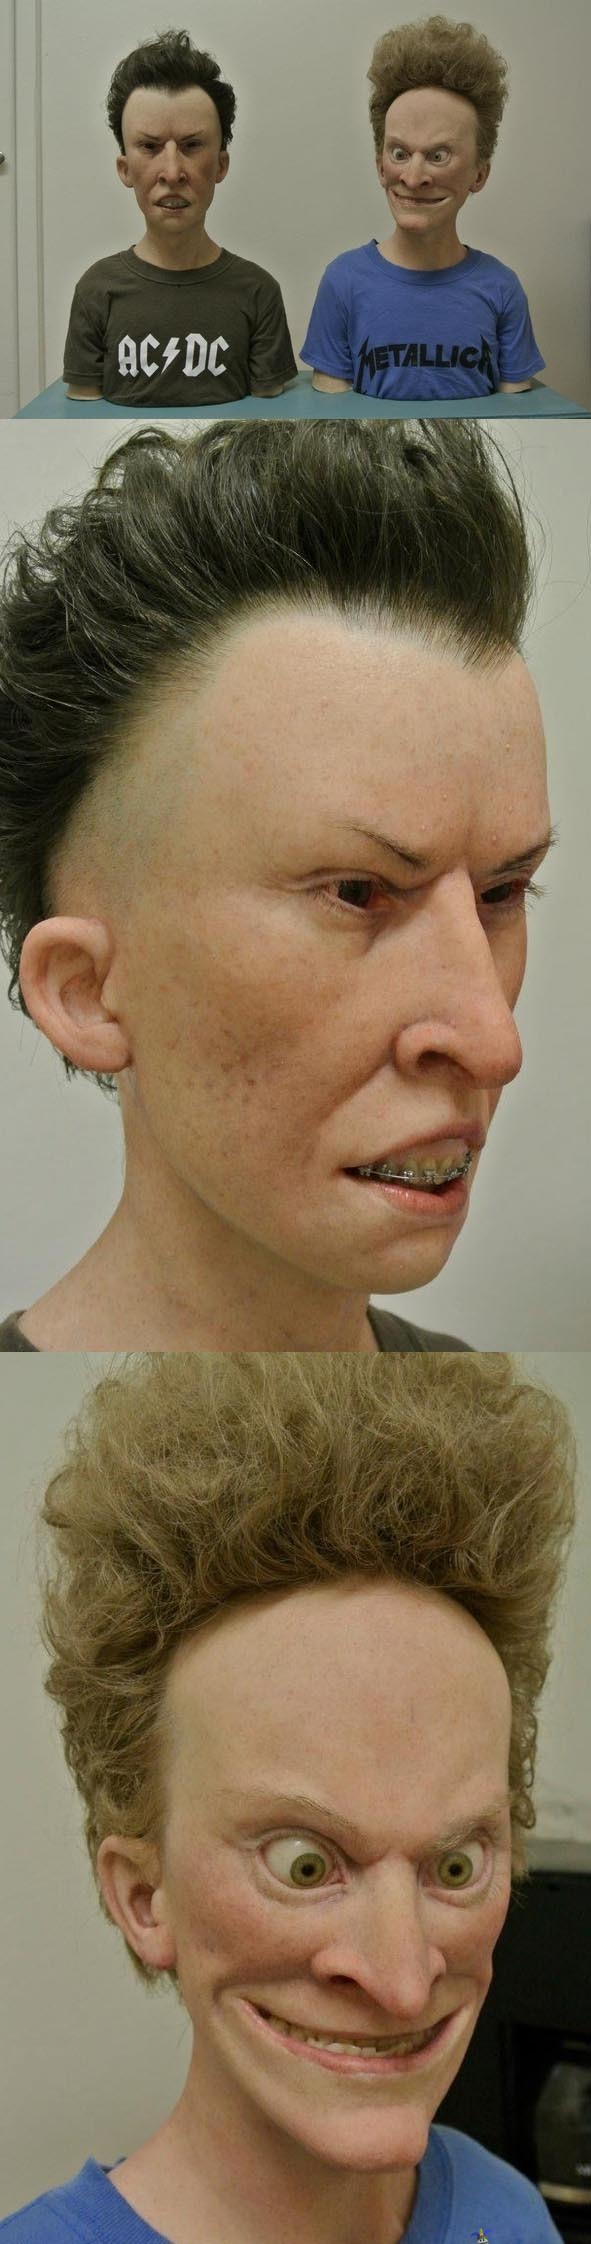 Beavis and Butt-Head - In real life